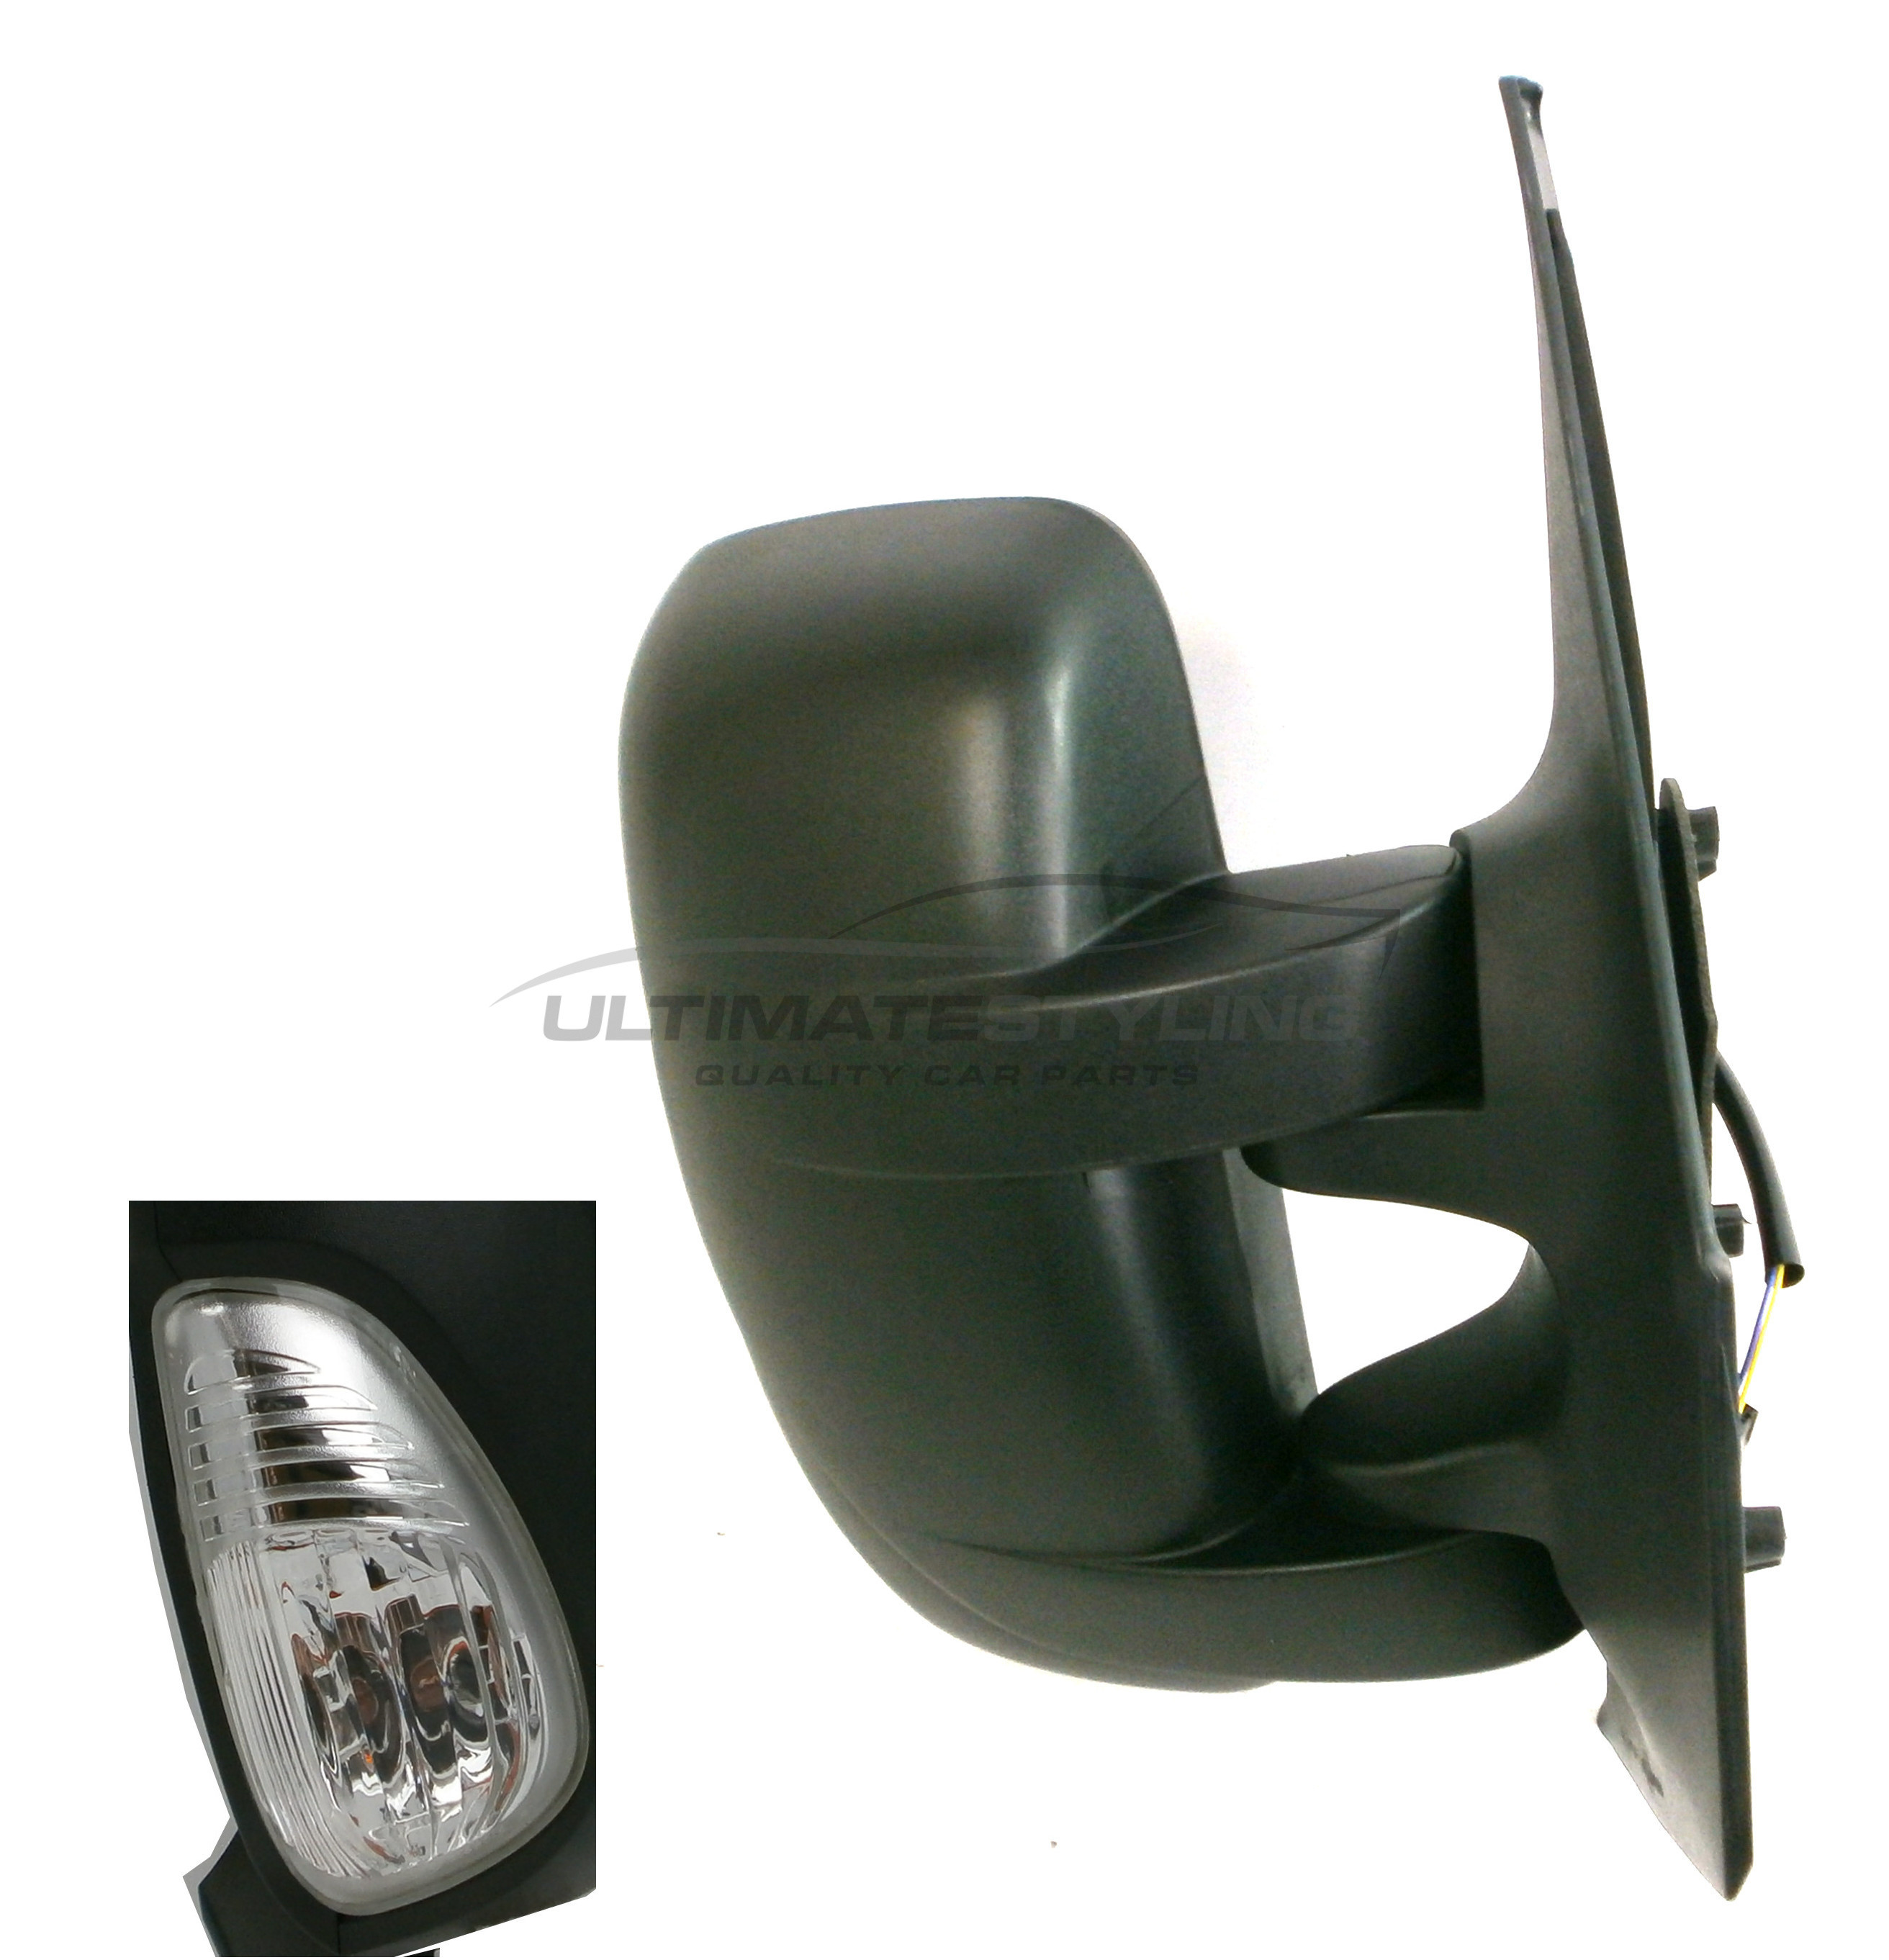 Wing Mirror Cover - Drivers Side (RH) - Black - Textured for Nissan NV400, Renault  Master, Vauxhall Movano and others